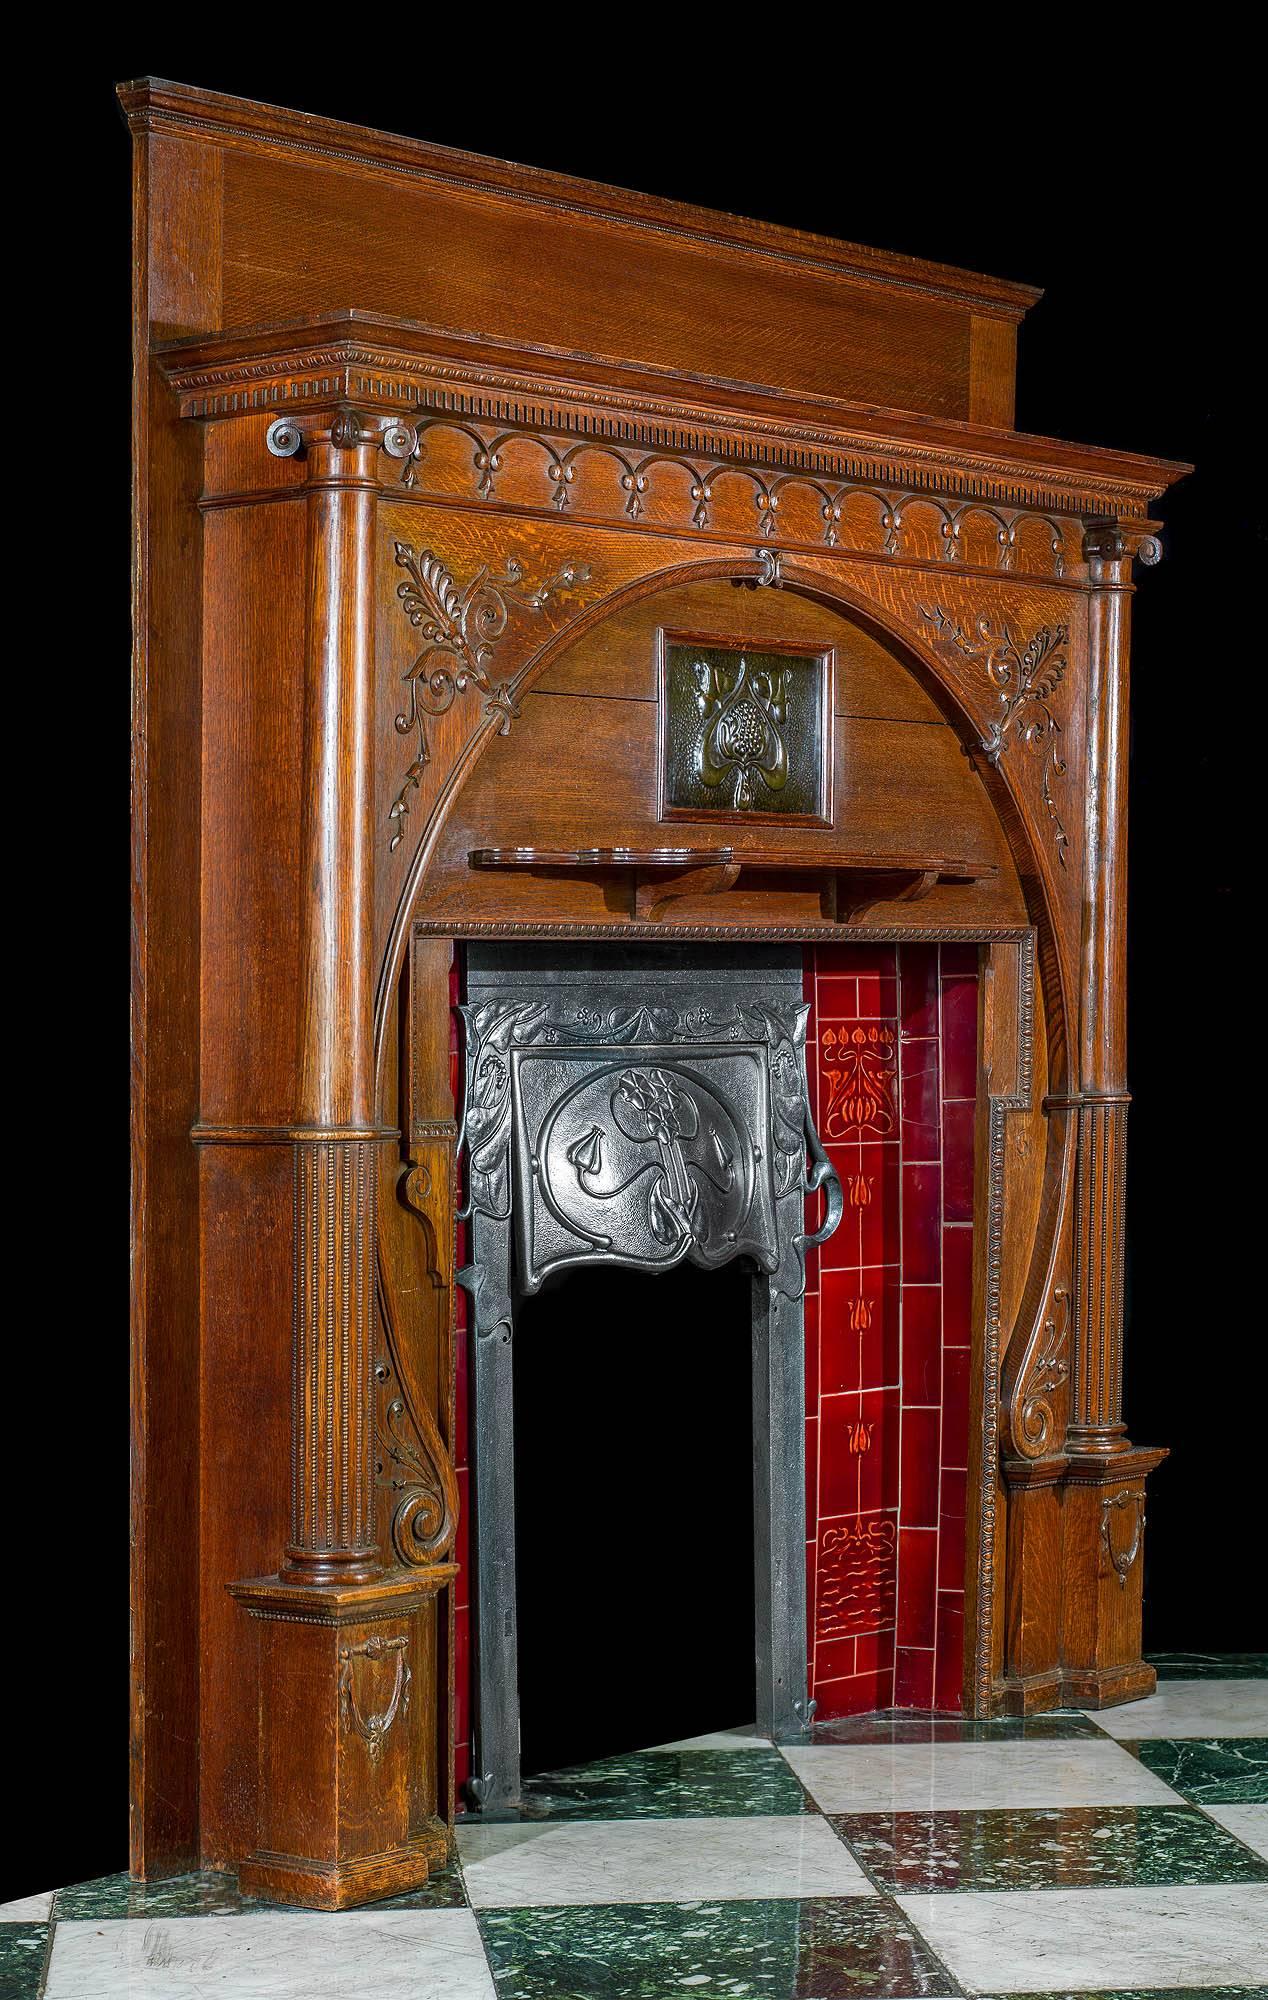 ART NOUVEAU BEAUTY
An exceptional and rare carved oak Art Nouveau chimneypiece with an integral decorative cast iron hooded insert set between two red tiled panels beneath the centred embossed copper plaque.

The carved athemion detail echoed on